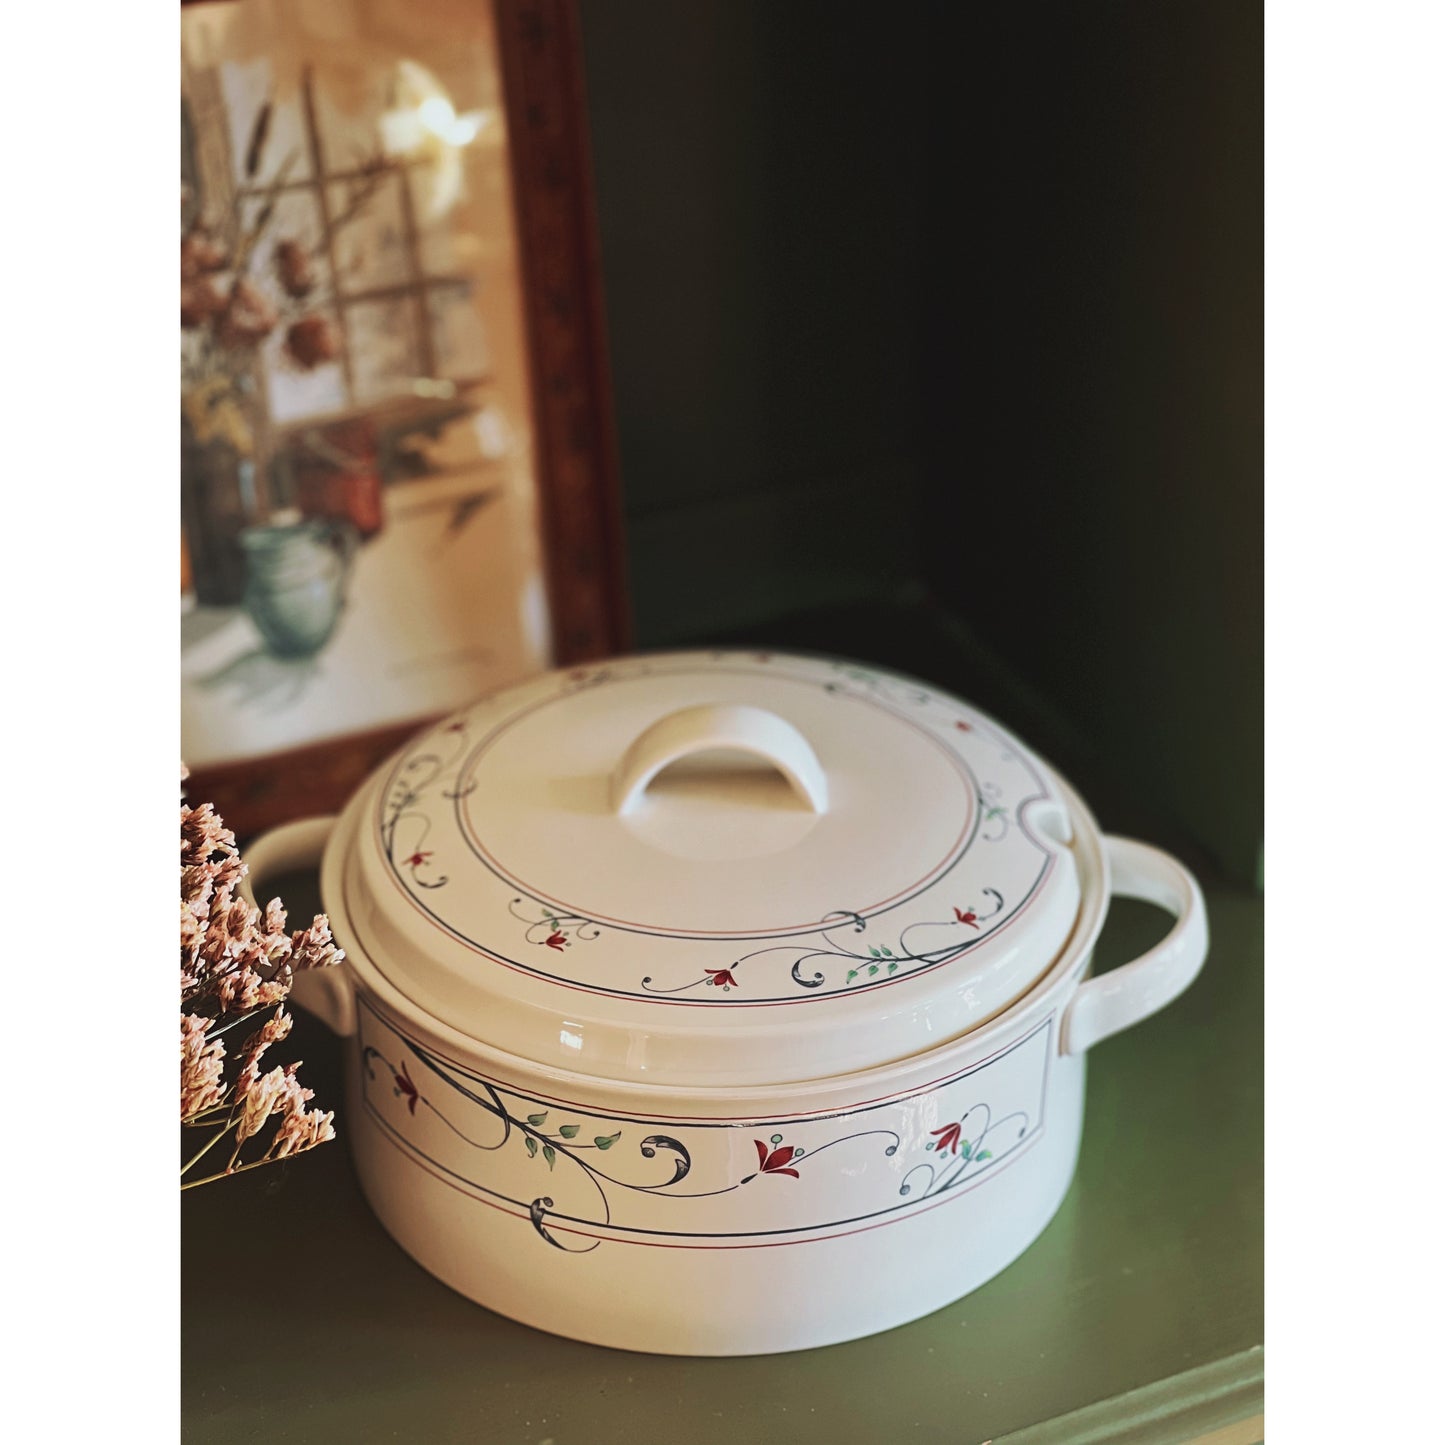 Vintage Mikasa Annette Tureen with Lid